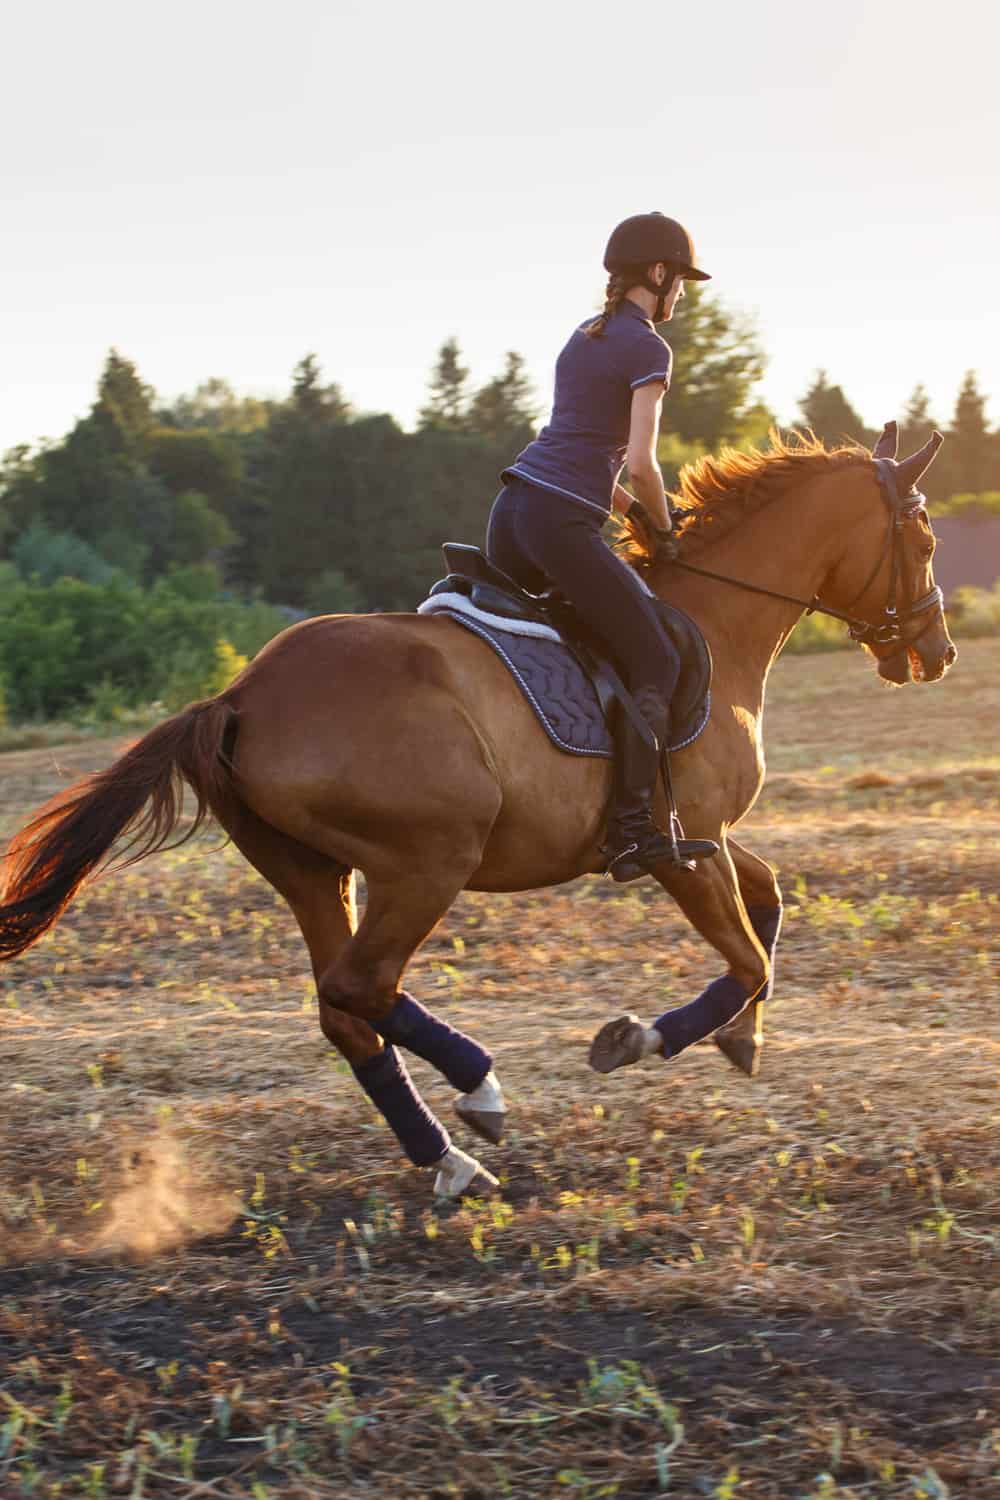 Common Horse Trotting Problems And How To Troubleshoot Them